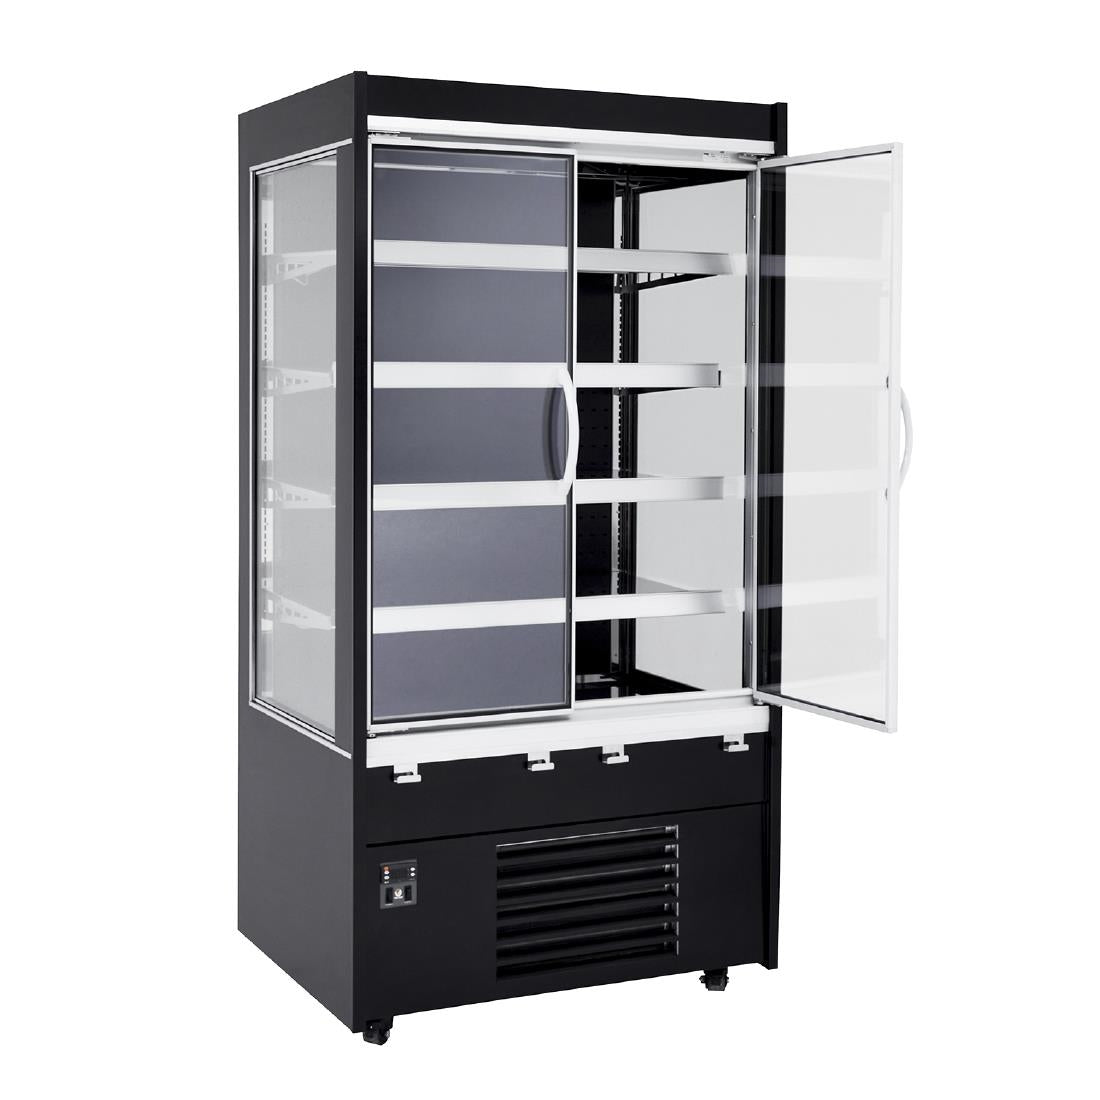 DP592 Victor Maxiline 1200mm Standard Depth Multideck With Doors MAXI120-VD-MT-G-GY